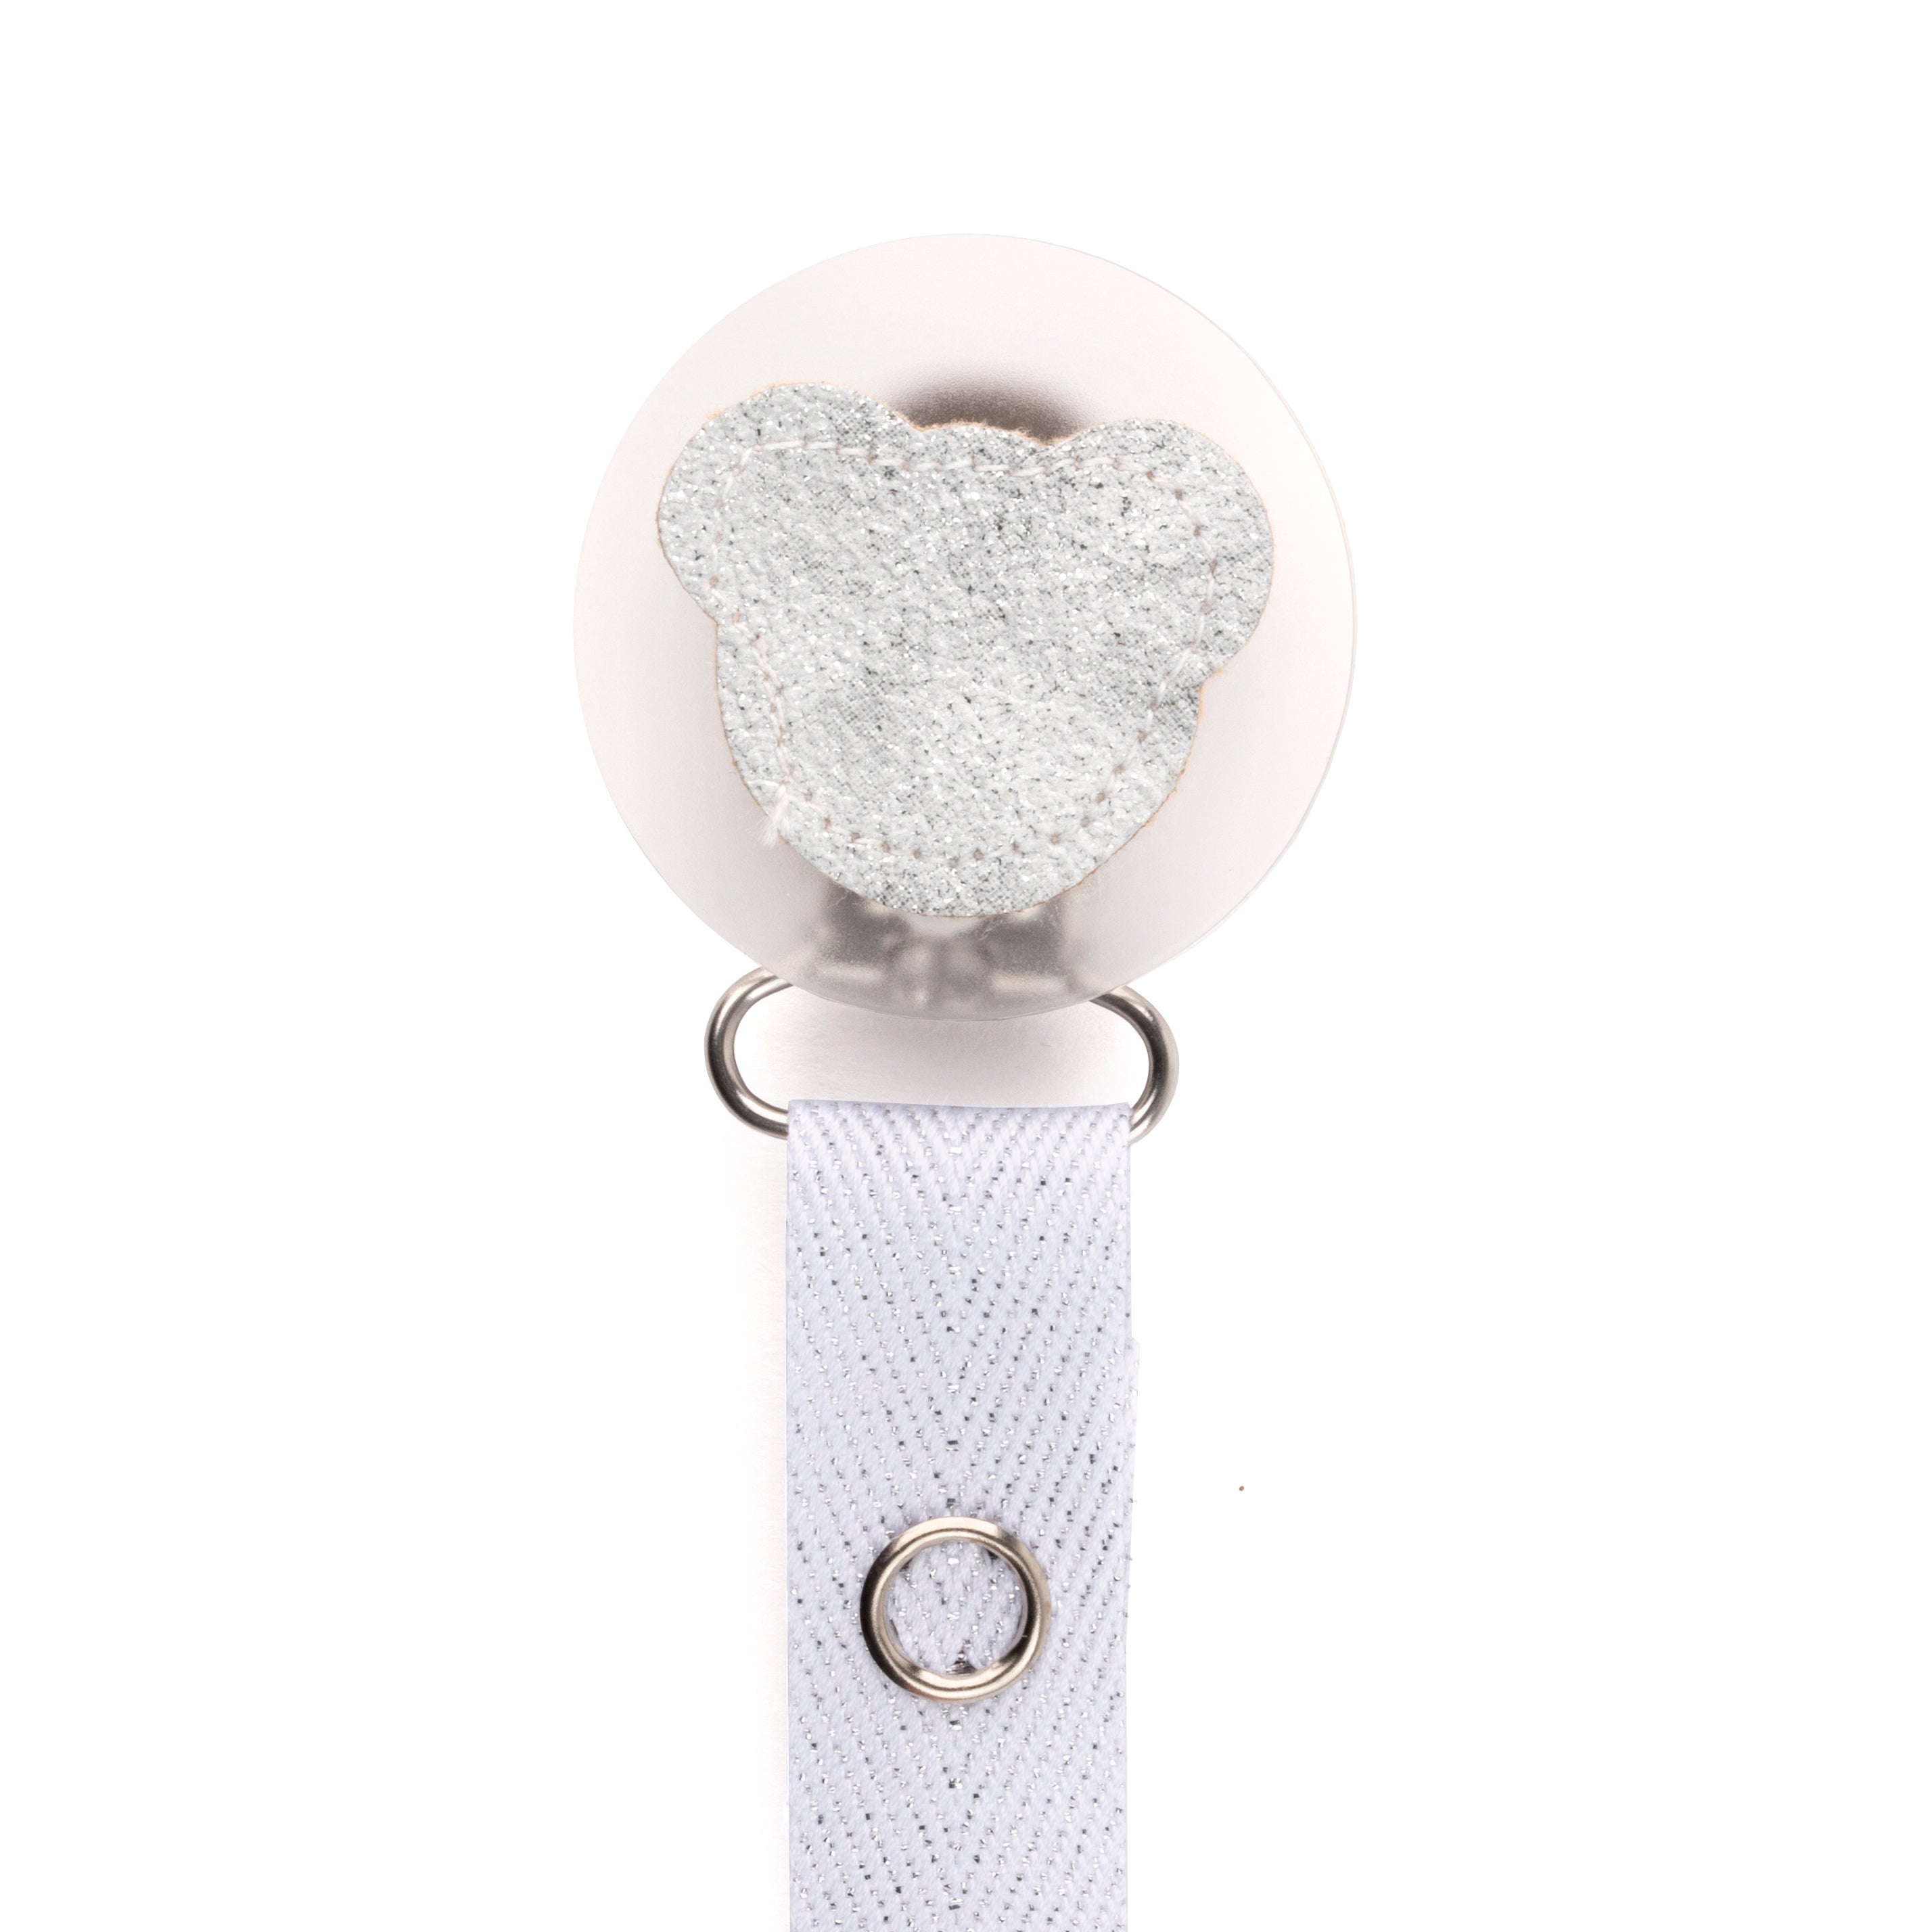 Classy Paci sparkle WHITE leather Teddy, Silver, Grey, girl boy baby pacifier clip